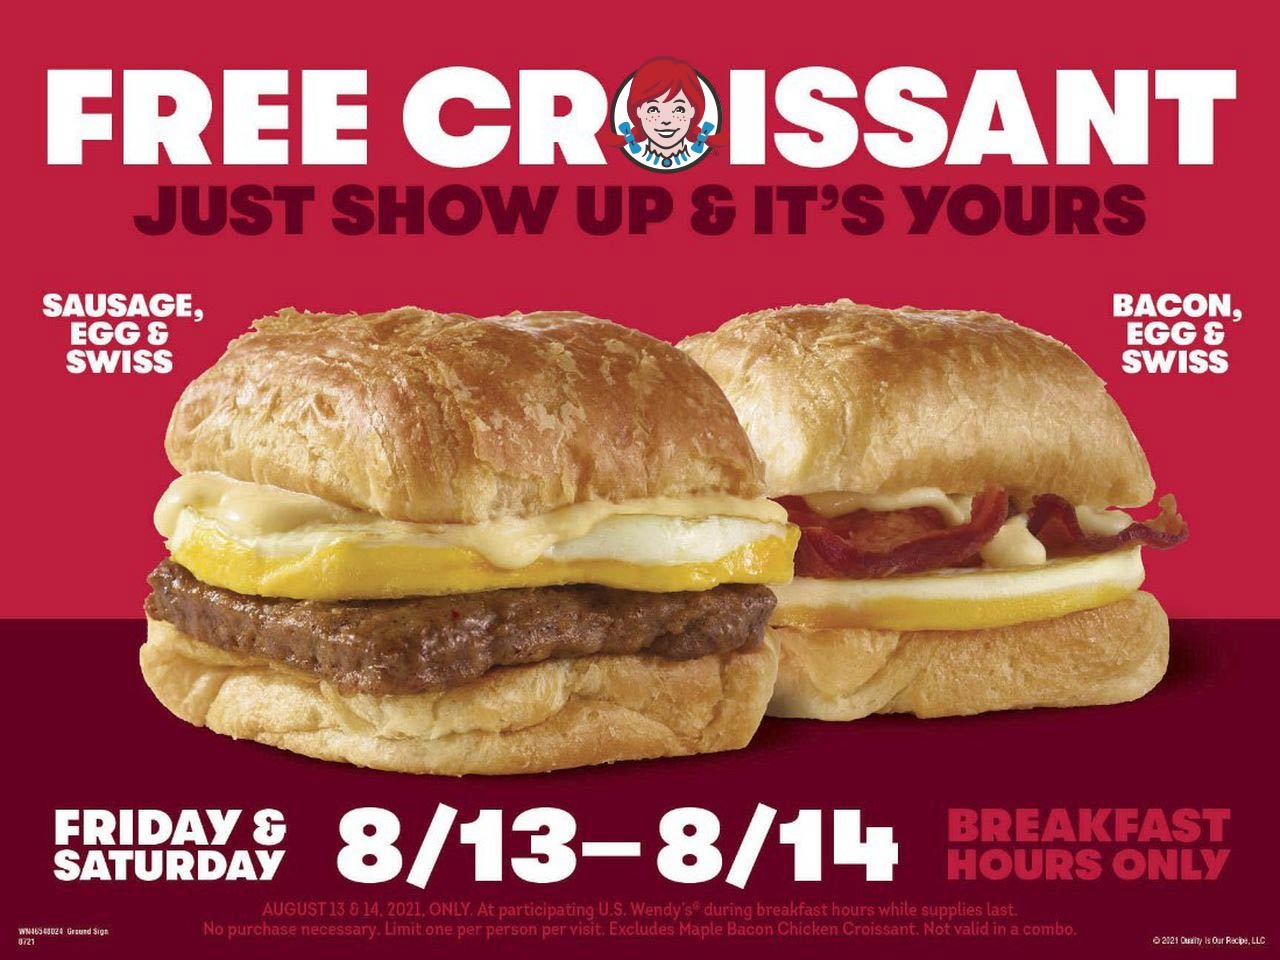 Wendys restaurants Coupon  Free breakfast croissant Fri & Sat at Wendys, no purchase necessary #wendys 